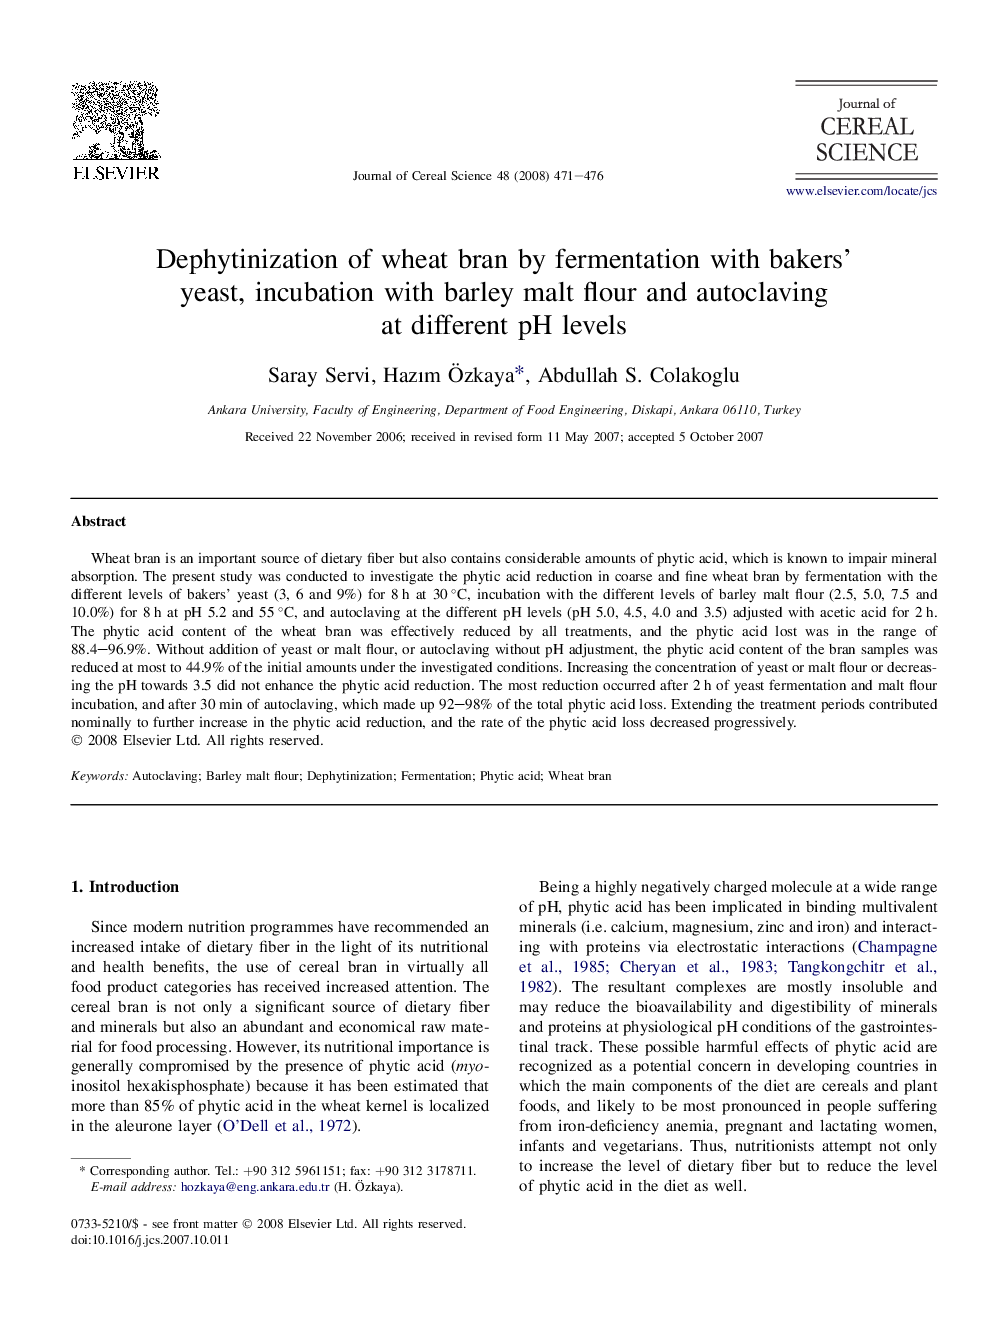 Dephytinization of wheat bran by fermentation with bakers' yeast, incubation with barley malt flour and autoclaving at different pH levels